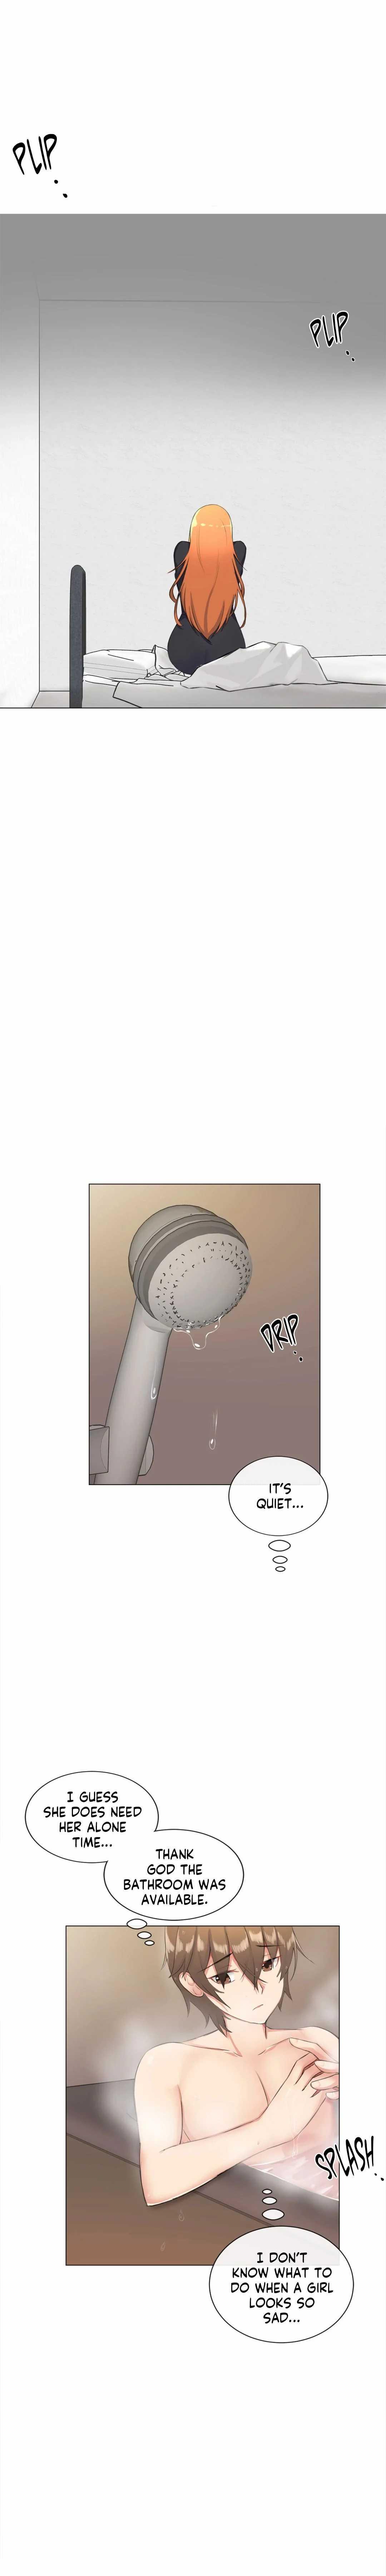 [Dumangoon, 130F] Sexcape Room: Pile Up Ch.9/9 [English] [Manhwa PDF] Completed 27